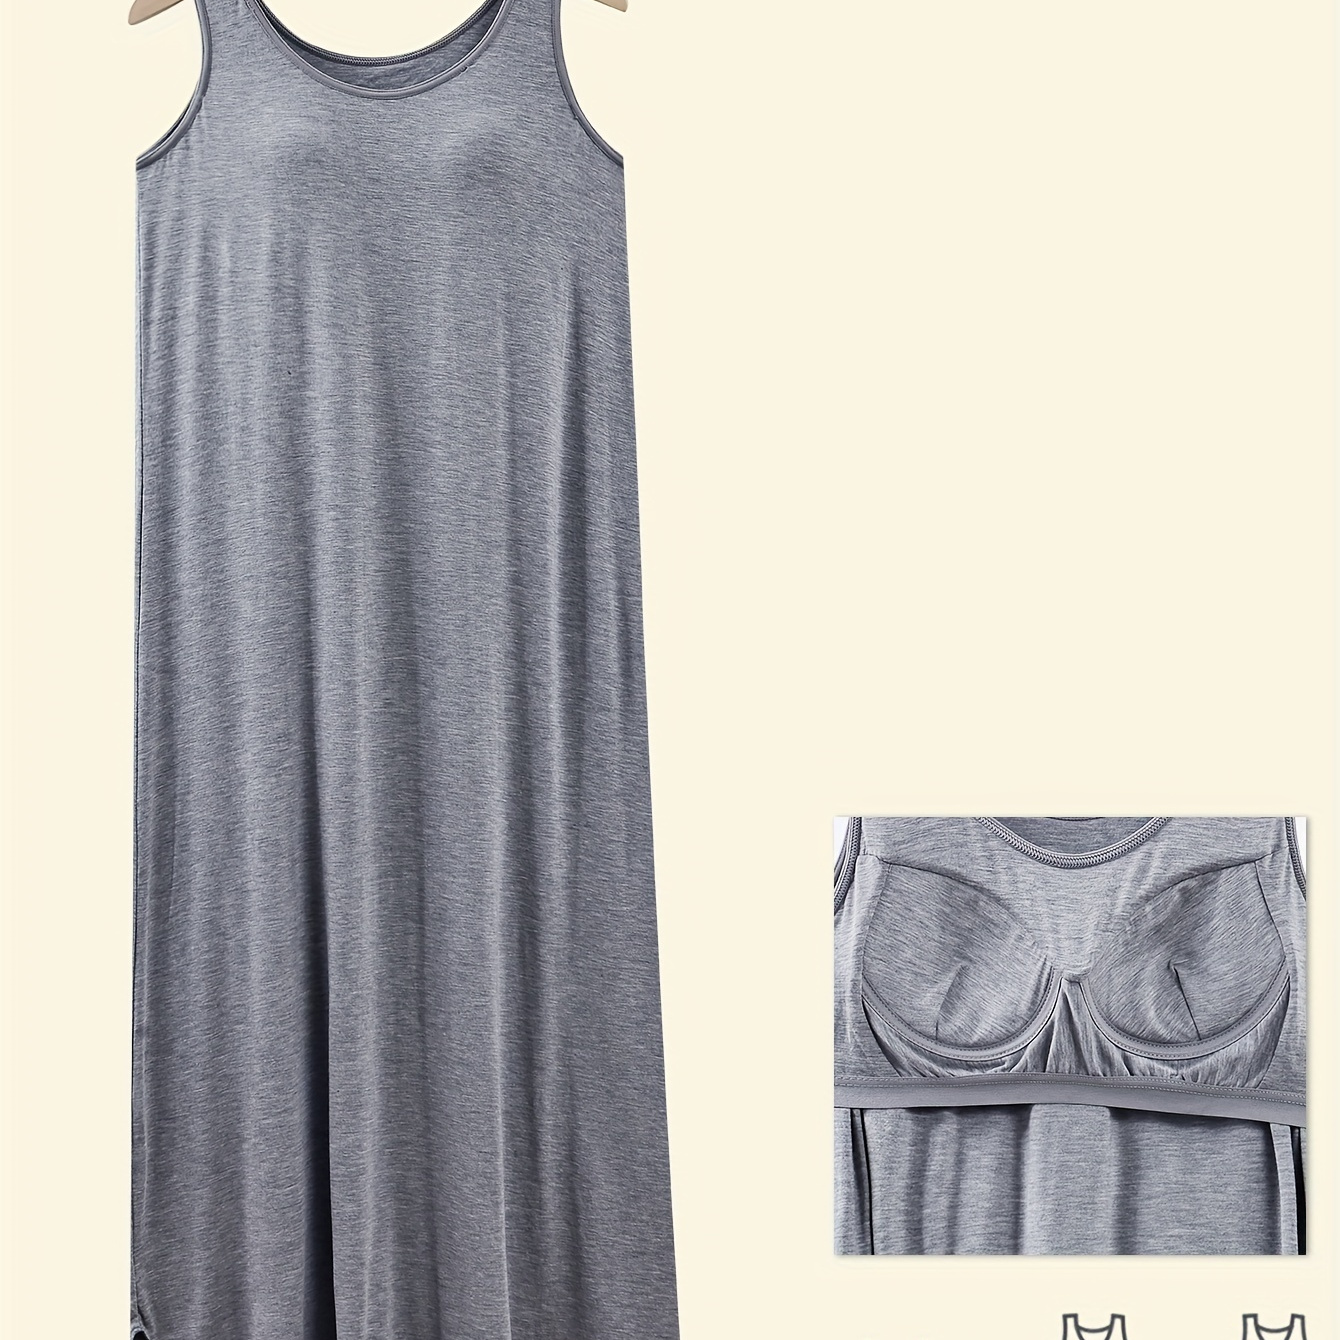 

Comfort Sleeveless Tank Dress With Built-in Bra Pad, Casual Style, Stretchy Midi Length, Grey Cotton Blend Fabric For Everyday Wear